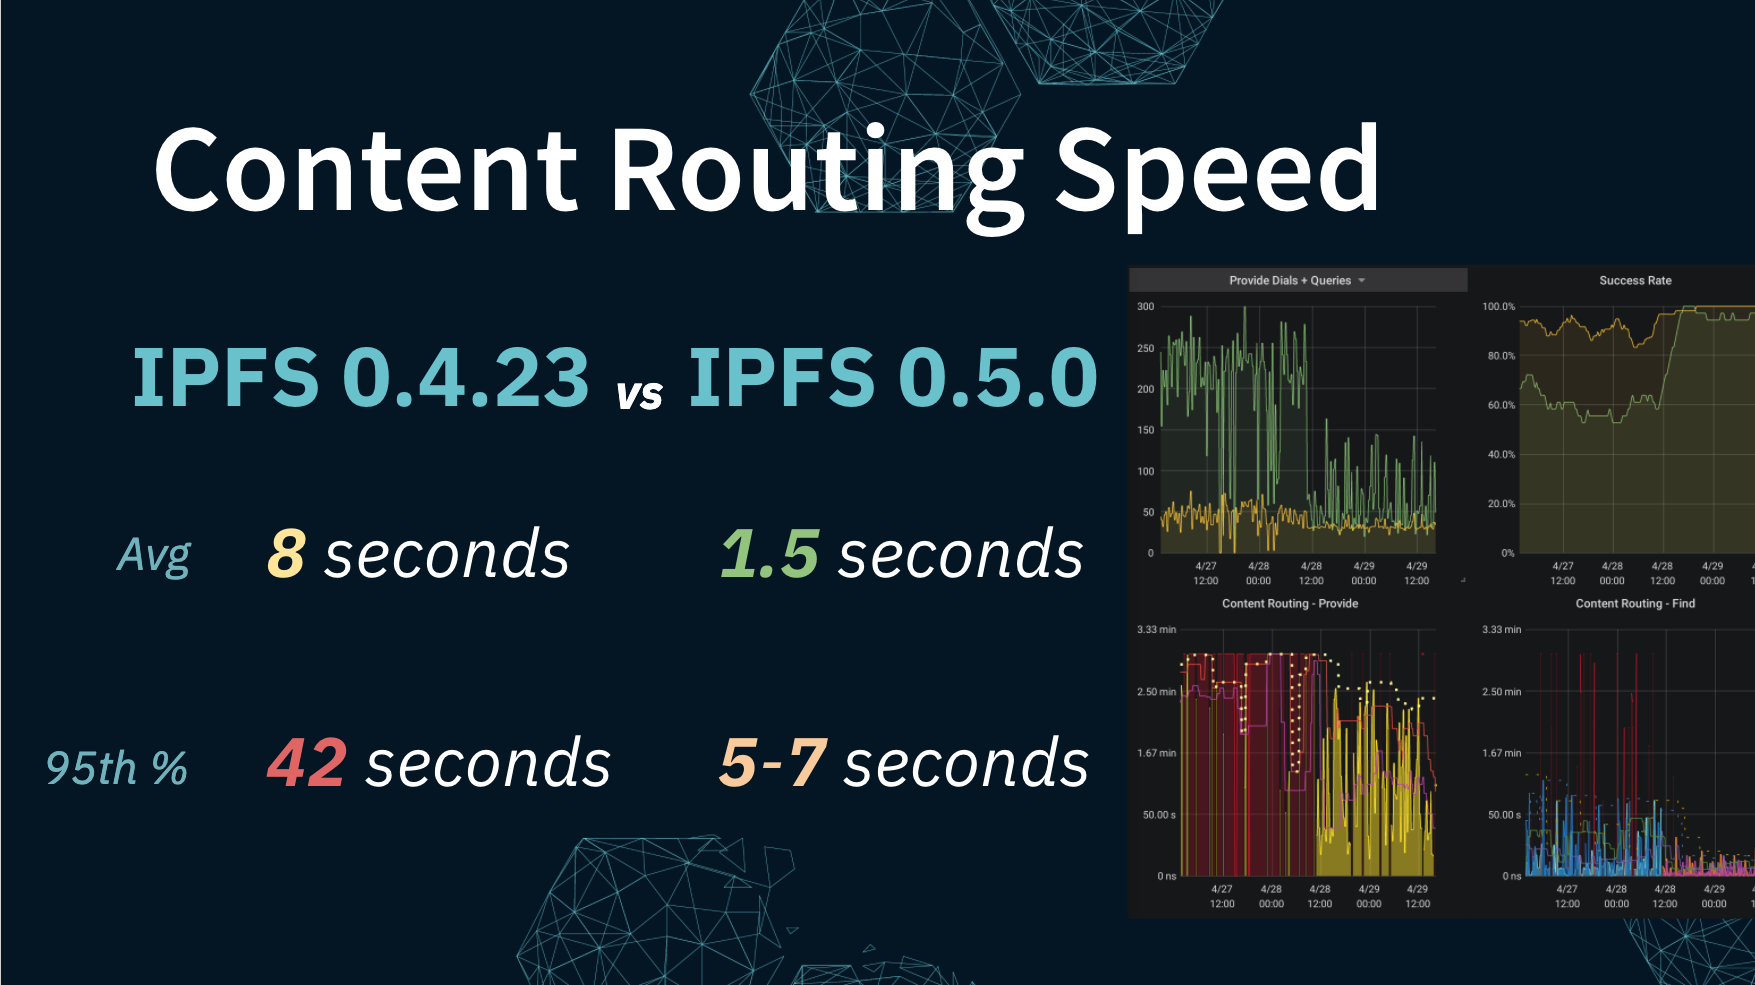 Content Routing Speed